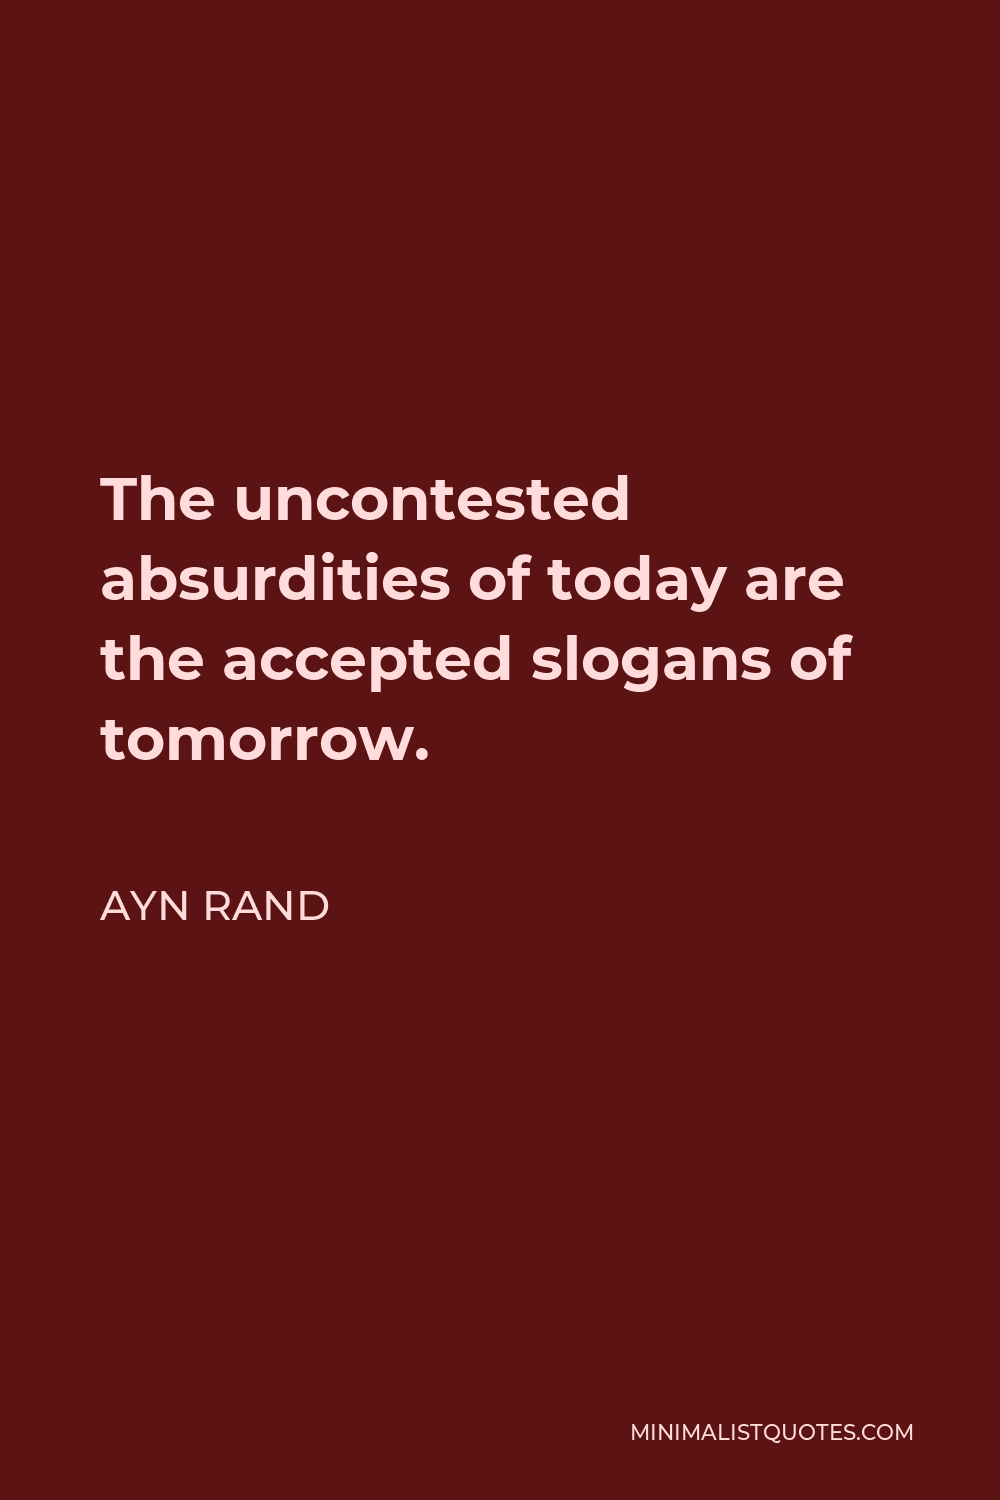 Ayn Rand Quote - The uncontested absurdities of today are the accepted slogans of tomorrow.